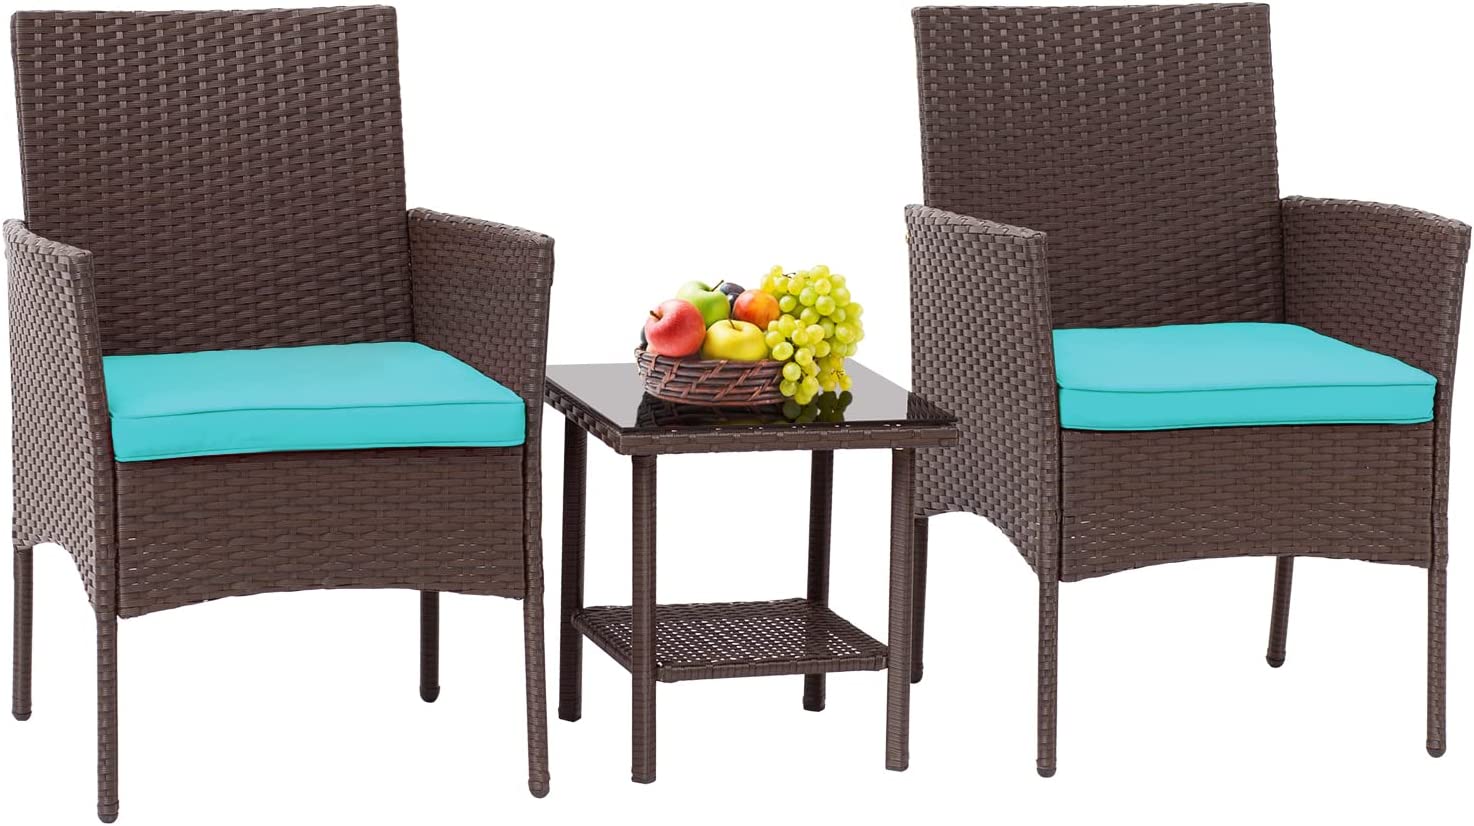 3 Piece Outdoor Furniture Set Patio Brown Wicker Chairs Furniture Bistro Conversation Set 2 Rattan Chairs with Blue Cushions and Glass Coffee Table for Porch Lawn Garden Balcony Backyard - image 1 of 7